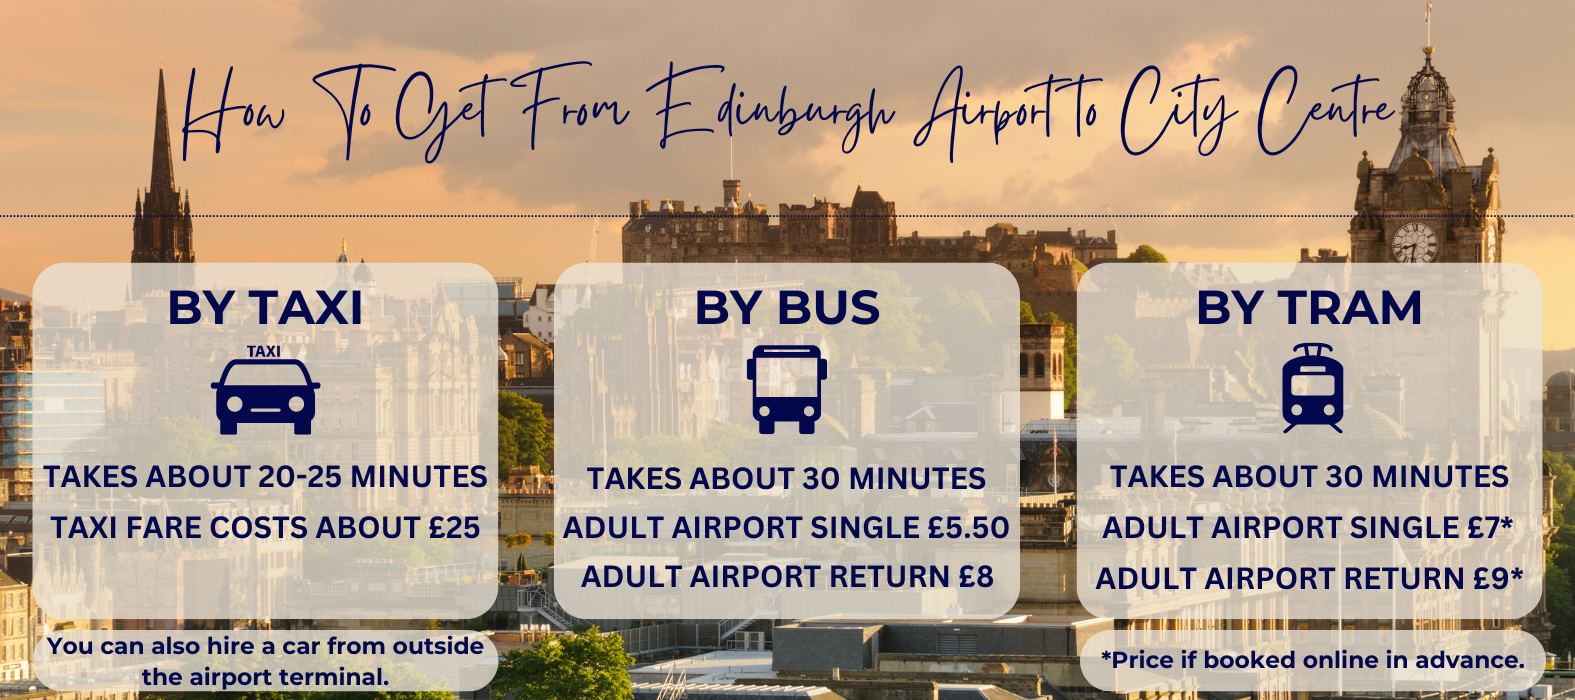 How To Get From Edinburgh Airport To City Centre